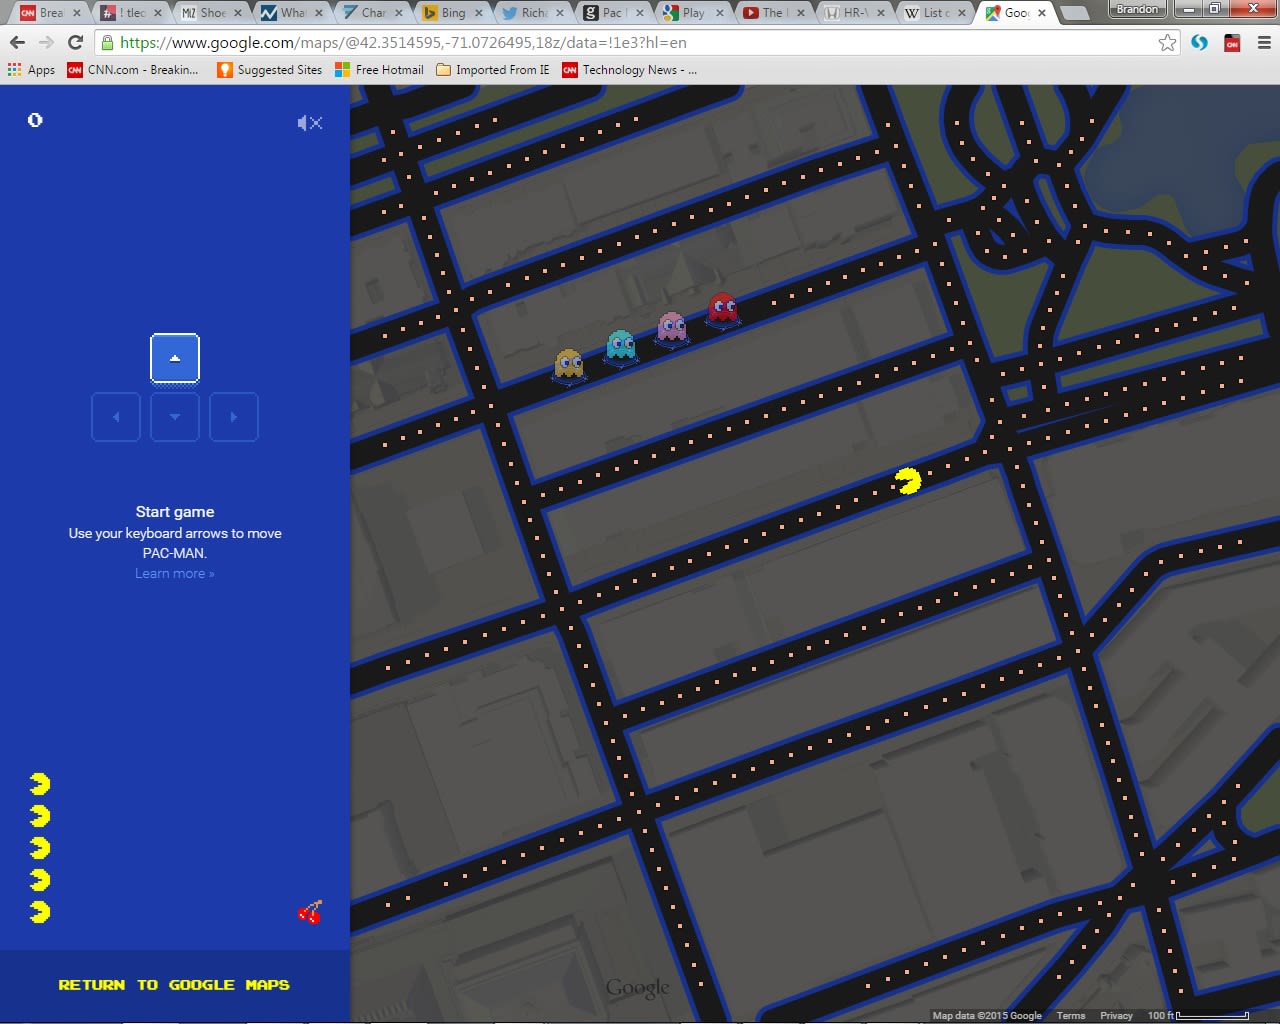 You can play Pac-Man inside Google Maps, from mobile or desktop